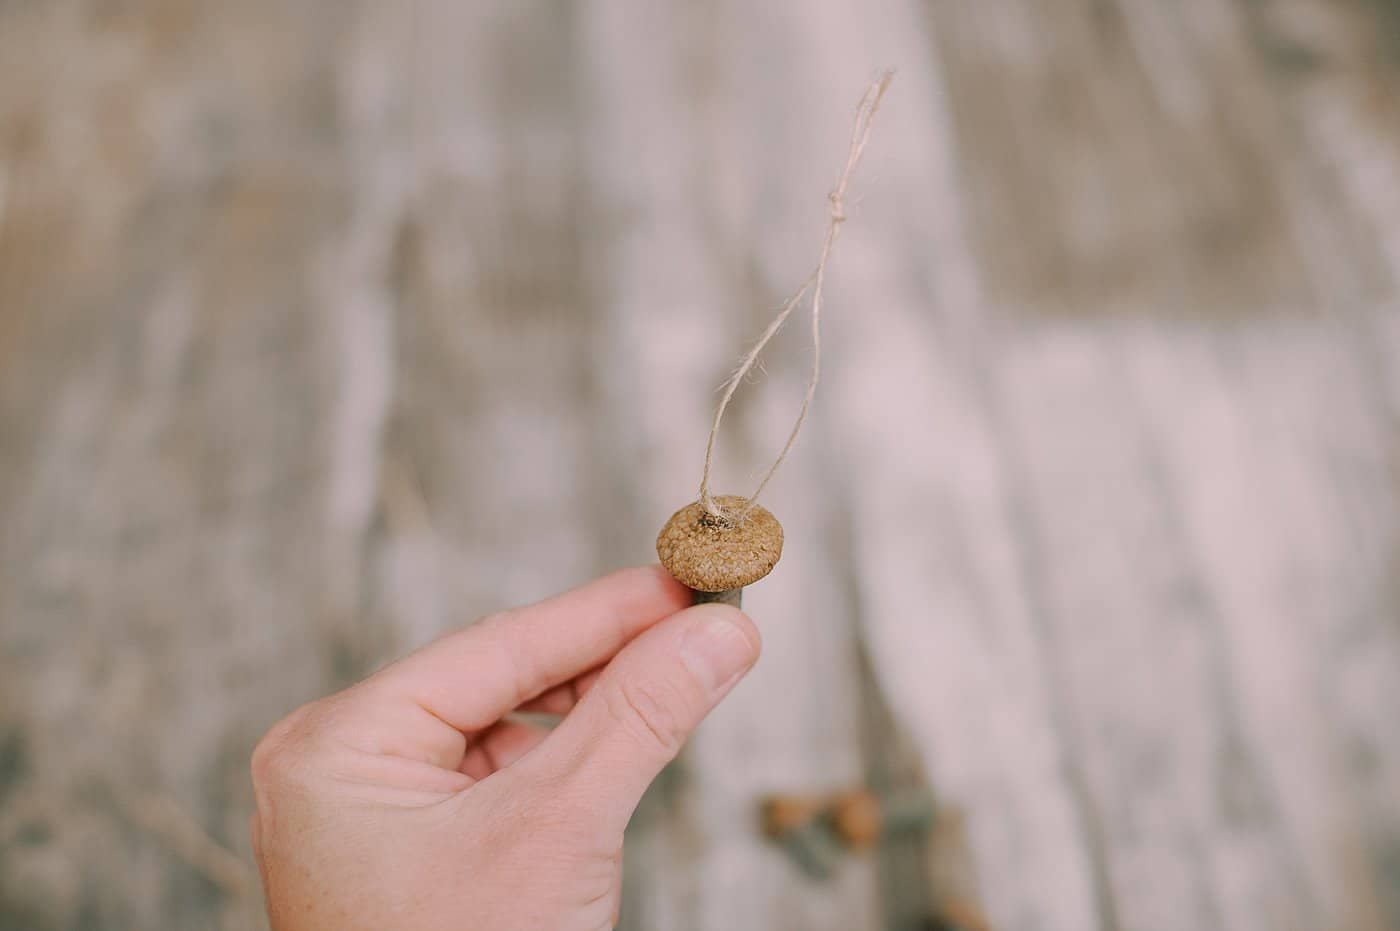 Hot glue twine to the acorn cap as a hanging string for the tiny mushroom ornaments.